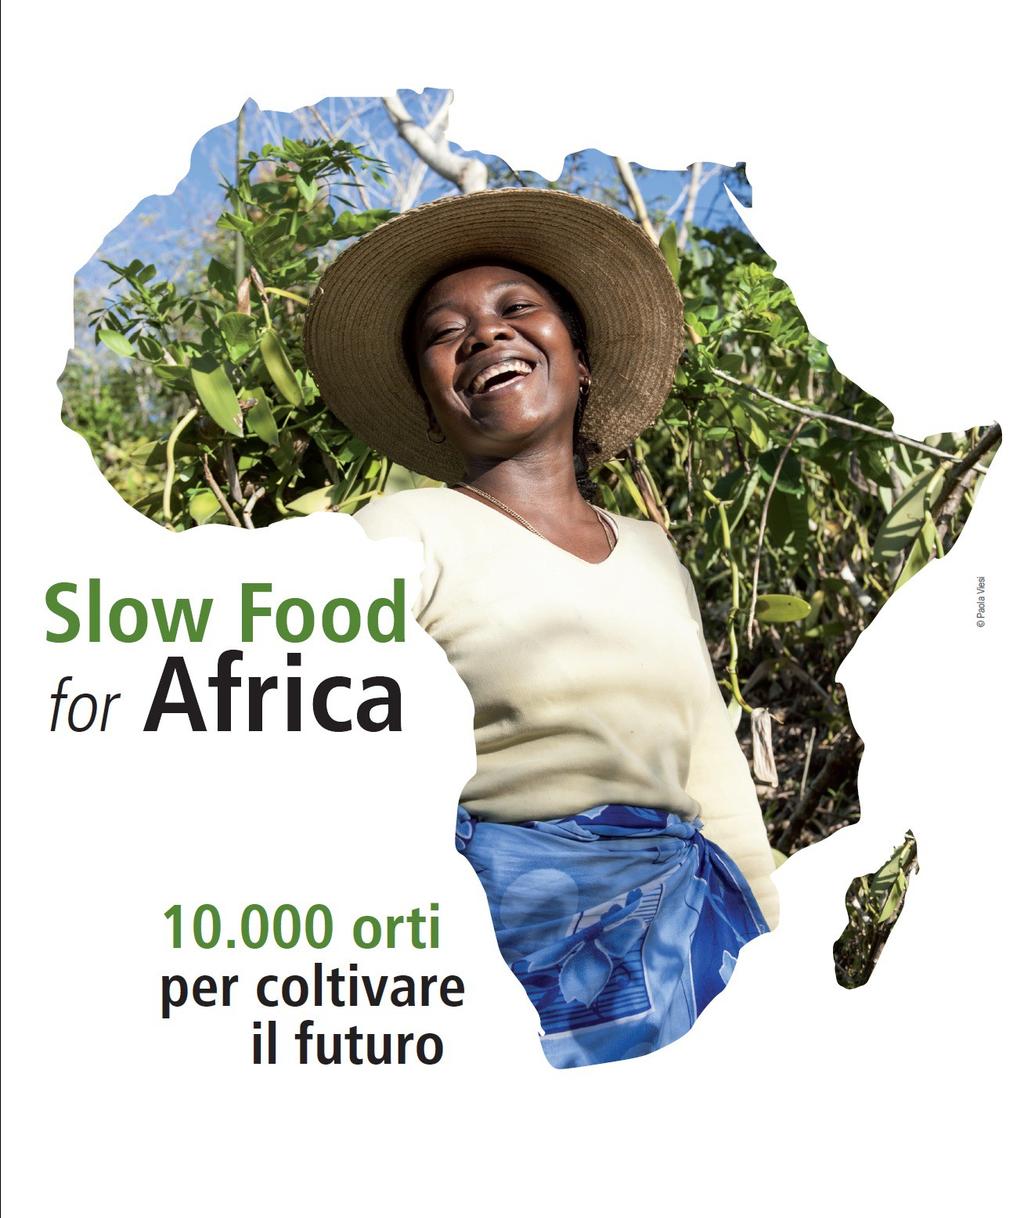 Ethic Lottery: Adopt a Food Garden in Africa Among the features of the 2014 edition, there is the Ethic Lottery: Adopt a Food Garden in Africa, a contest with prizes which will give contestants the